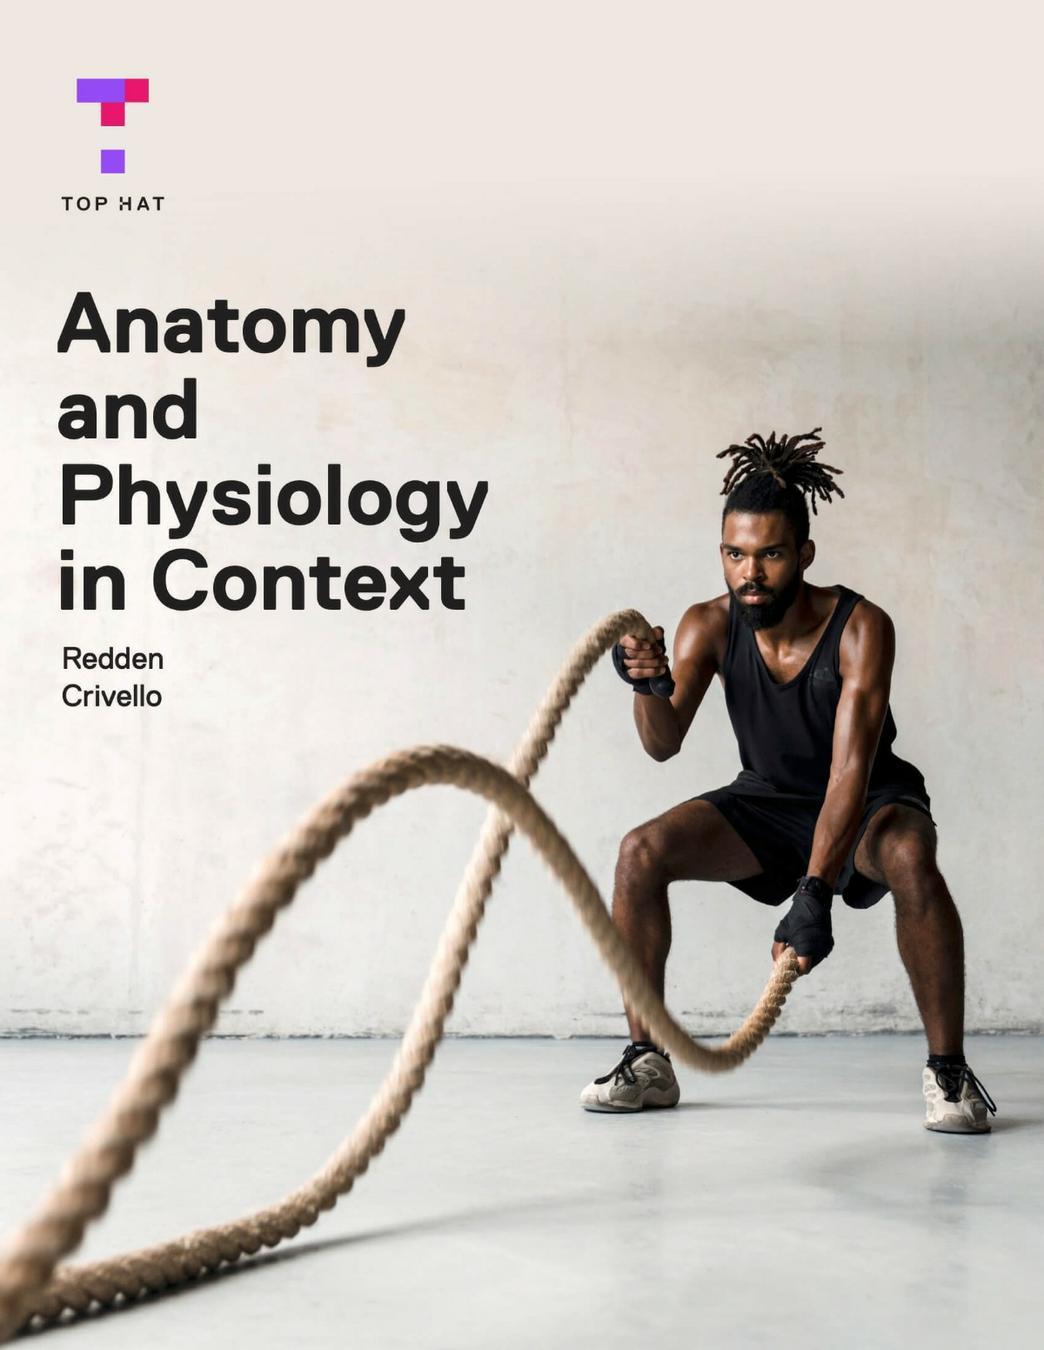 Anatomy and Physiology in Context cover photo